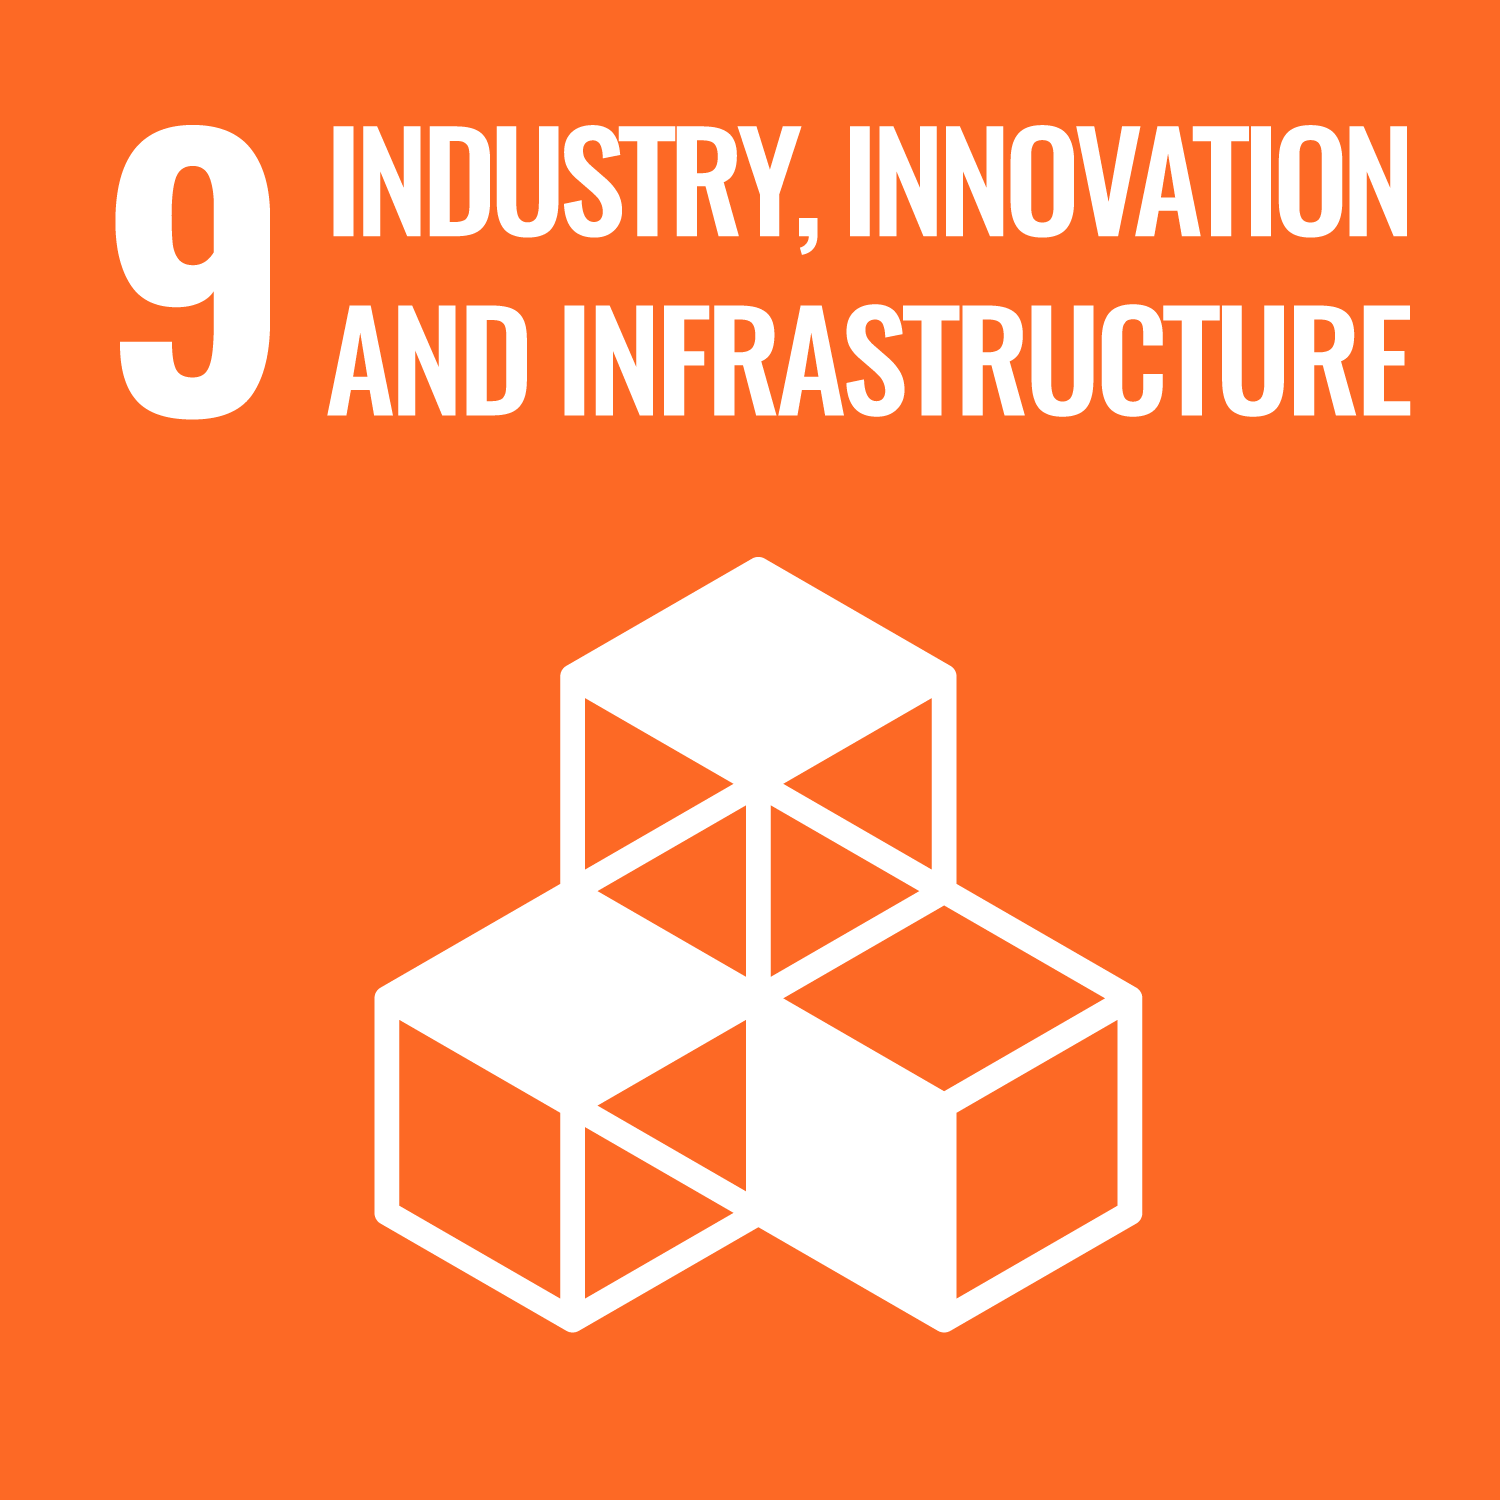 Goal Nine: Build resilient infrastructure, promote inclusive and sustainable industrialization and foster innovation